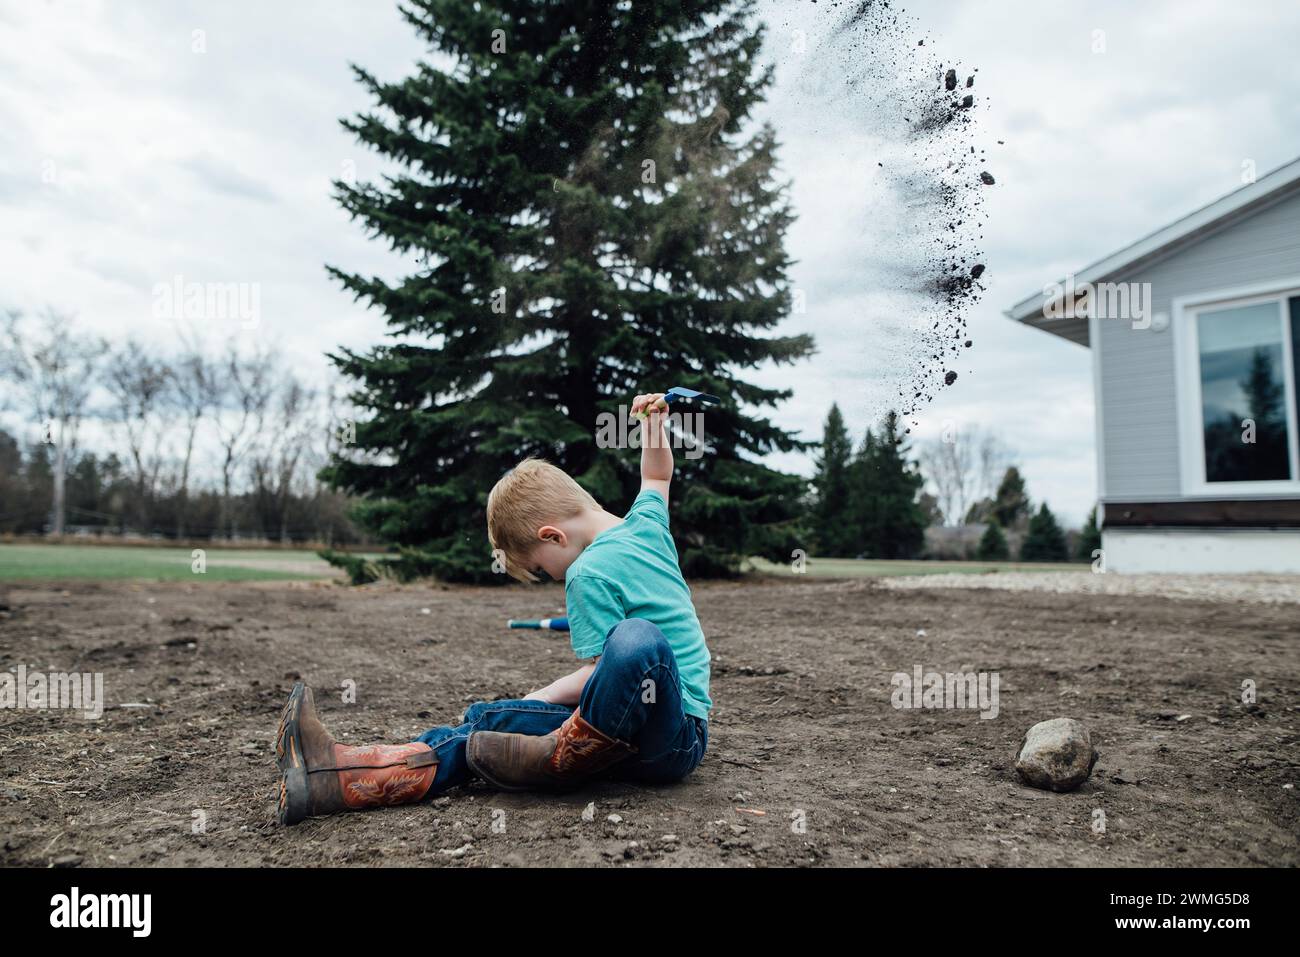 Side view of young boy sitting in yard while throwing handfuls of dirt Stock Photo